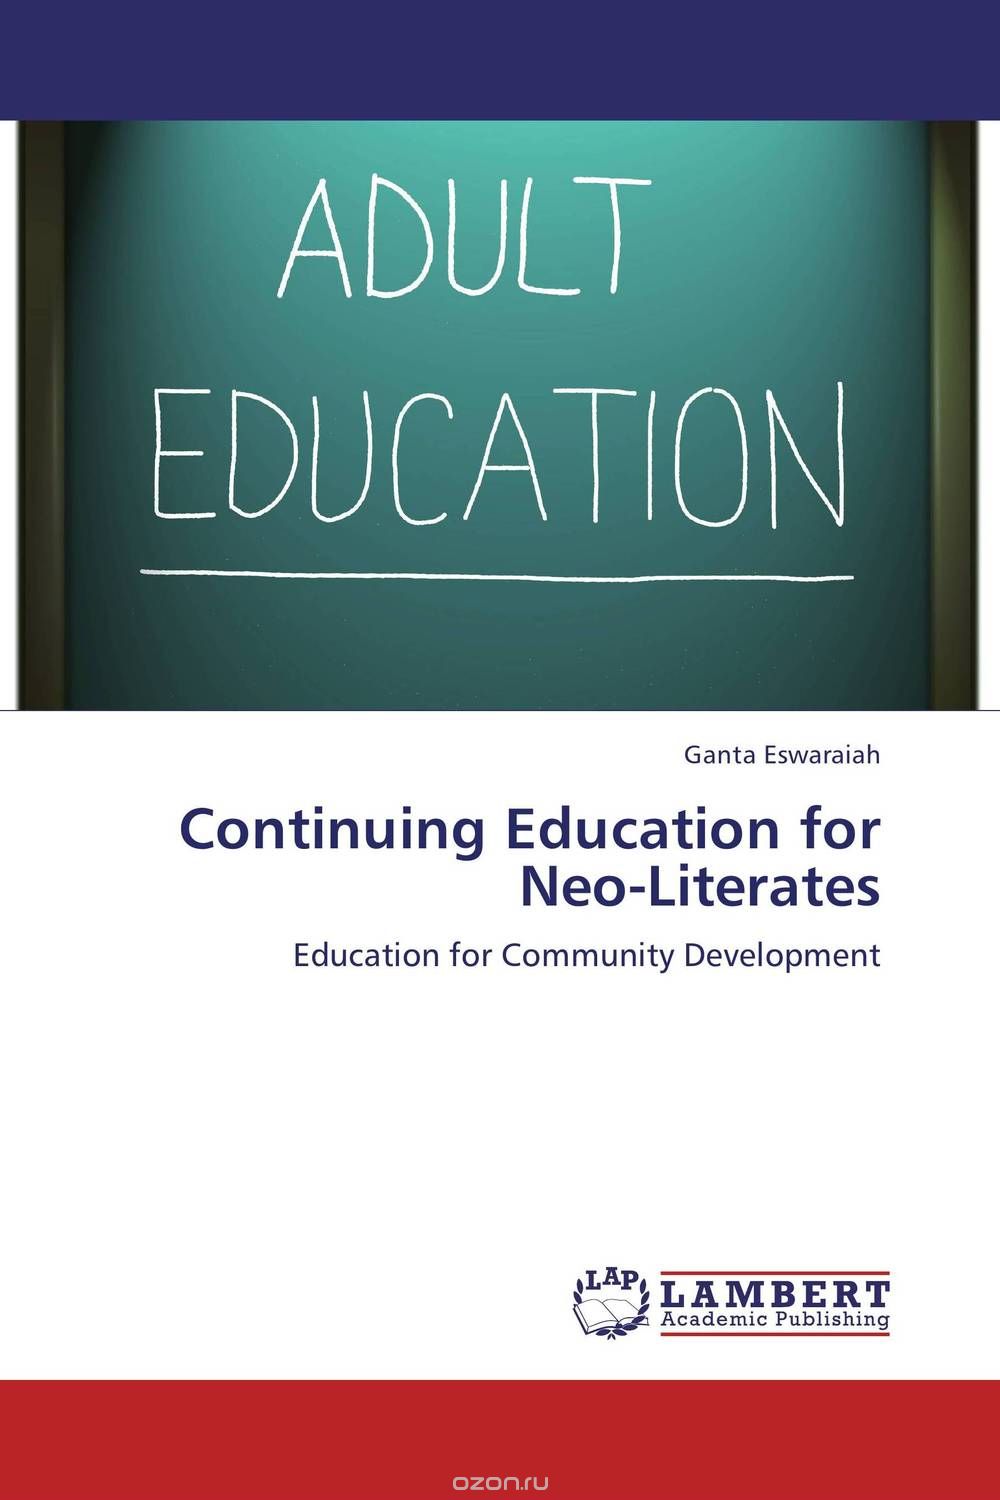 Continuing Education for Neo-Literates